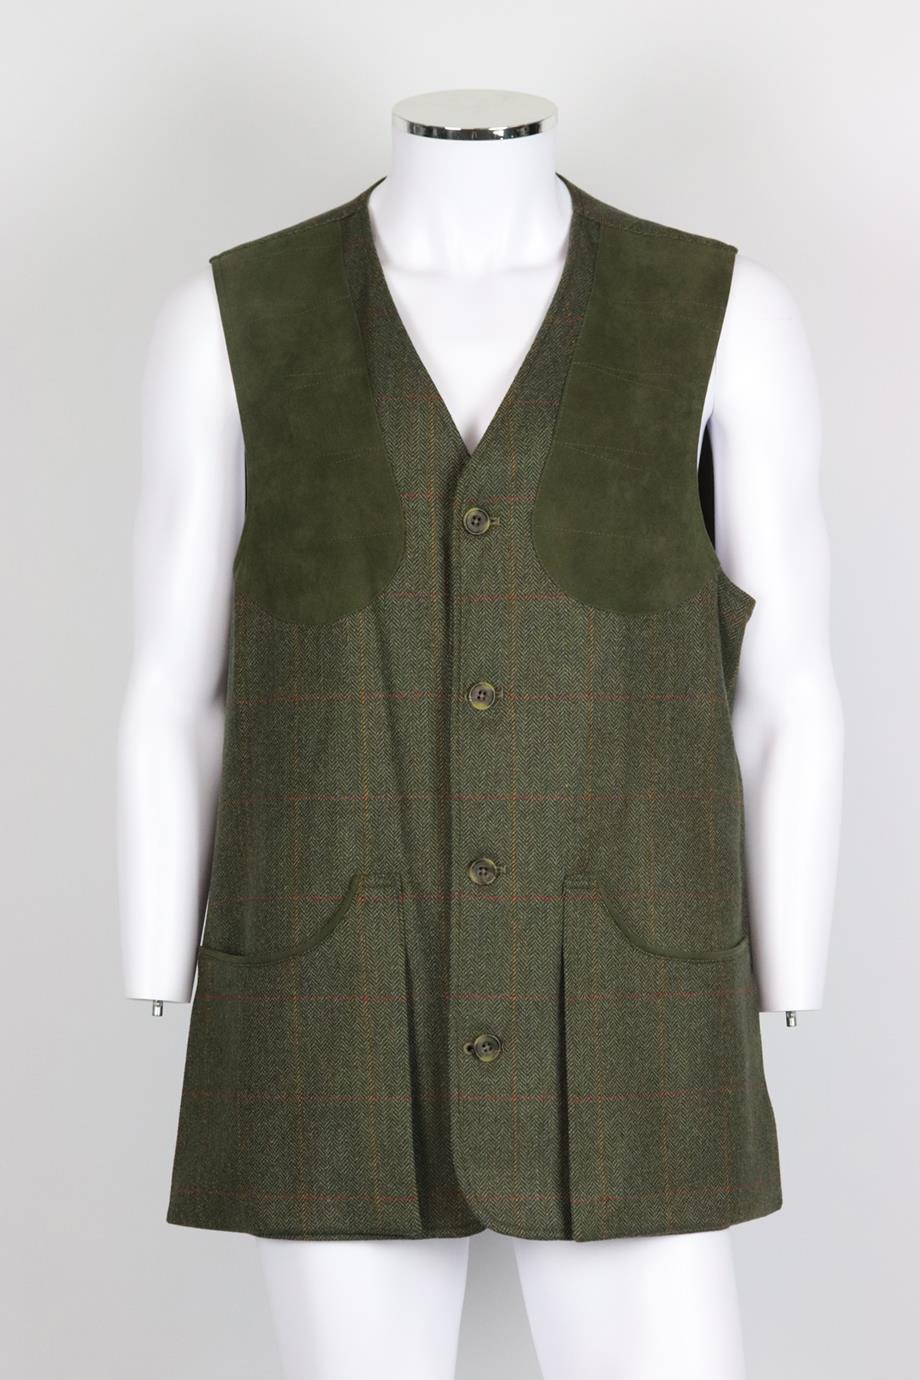 William & Son men's checked wool blend tweed vest. Green, yellow and red. Sleeveless, v-neck. Button fastening at front. 100% Wool; lining: 100% viscose. Size: Large (IT 50, EU 50, UK/US Chest 40). Chest: 44.4 in. Waist: 44 in. Hips: 48 in. Length: